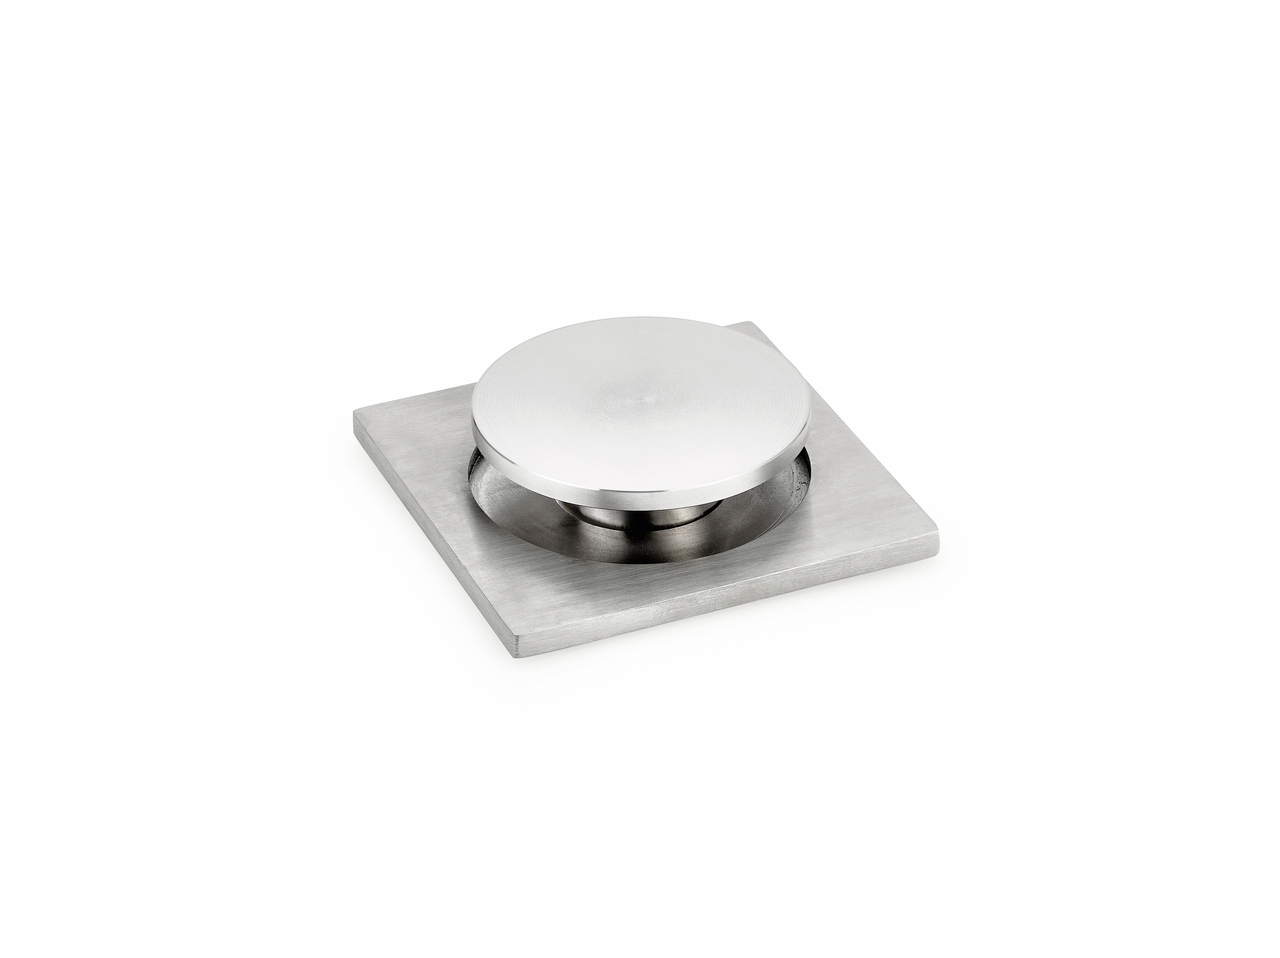  Glass adapter disk, stainless steel